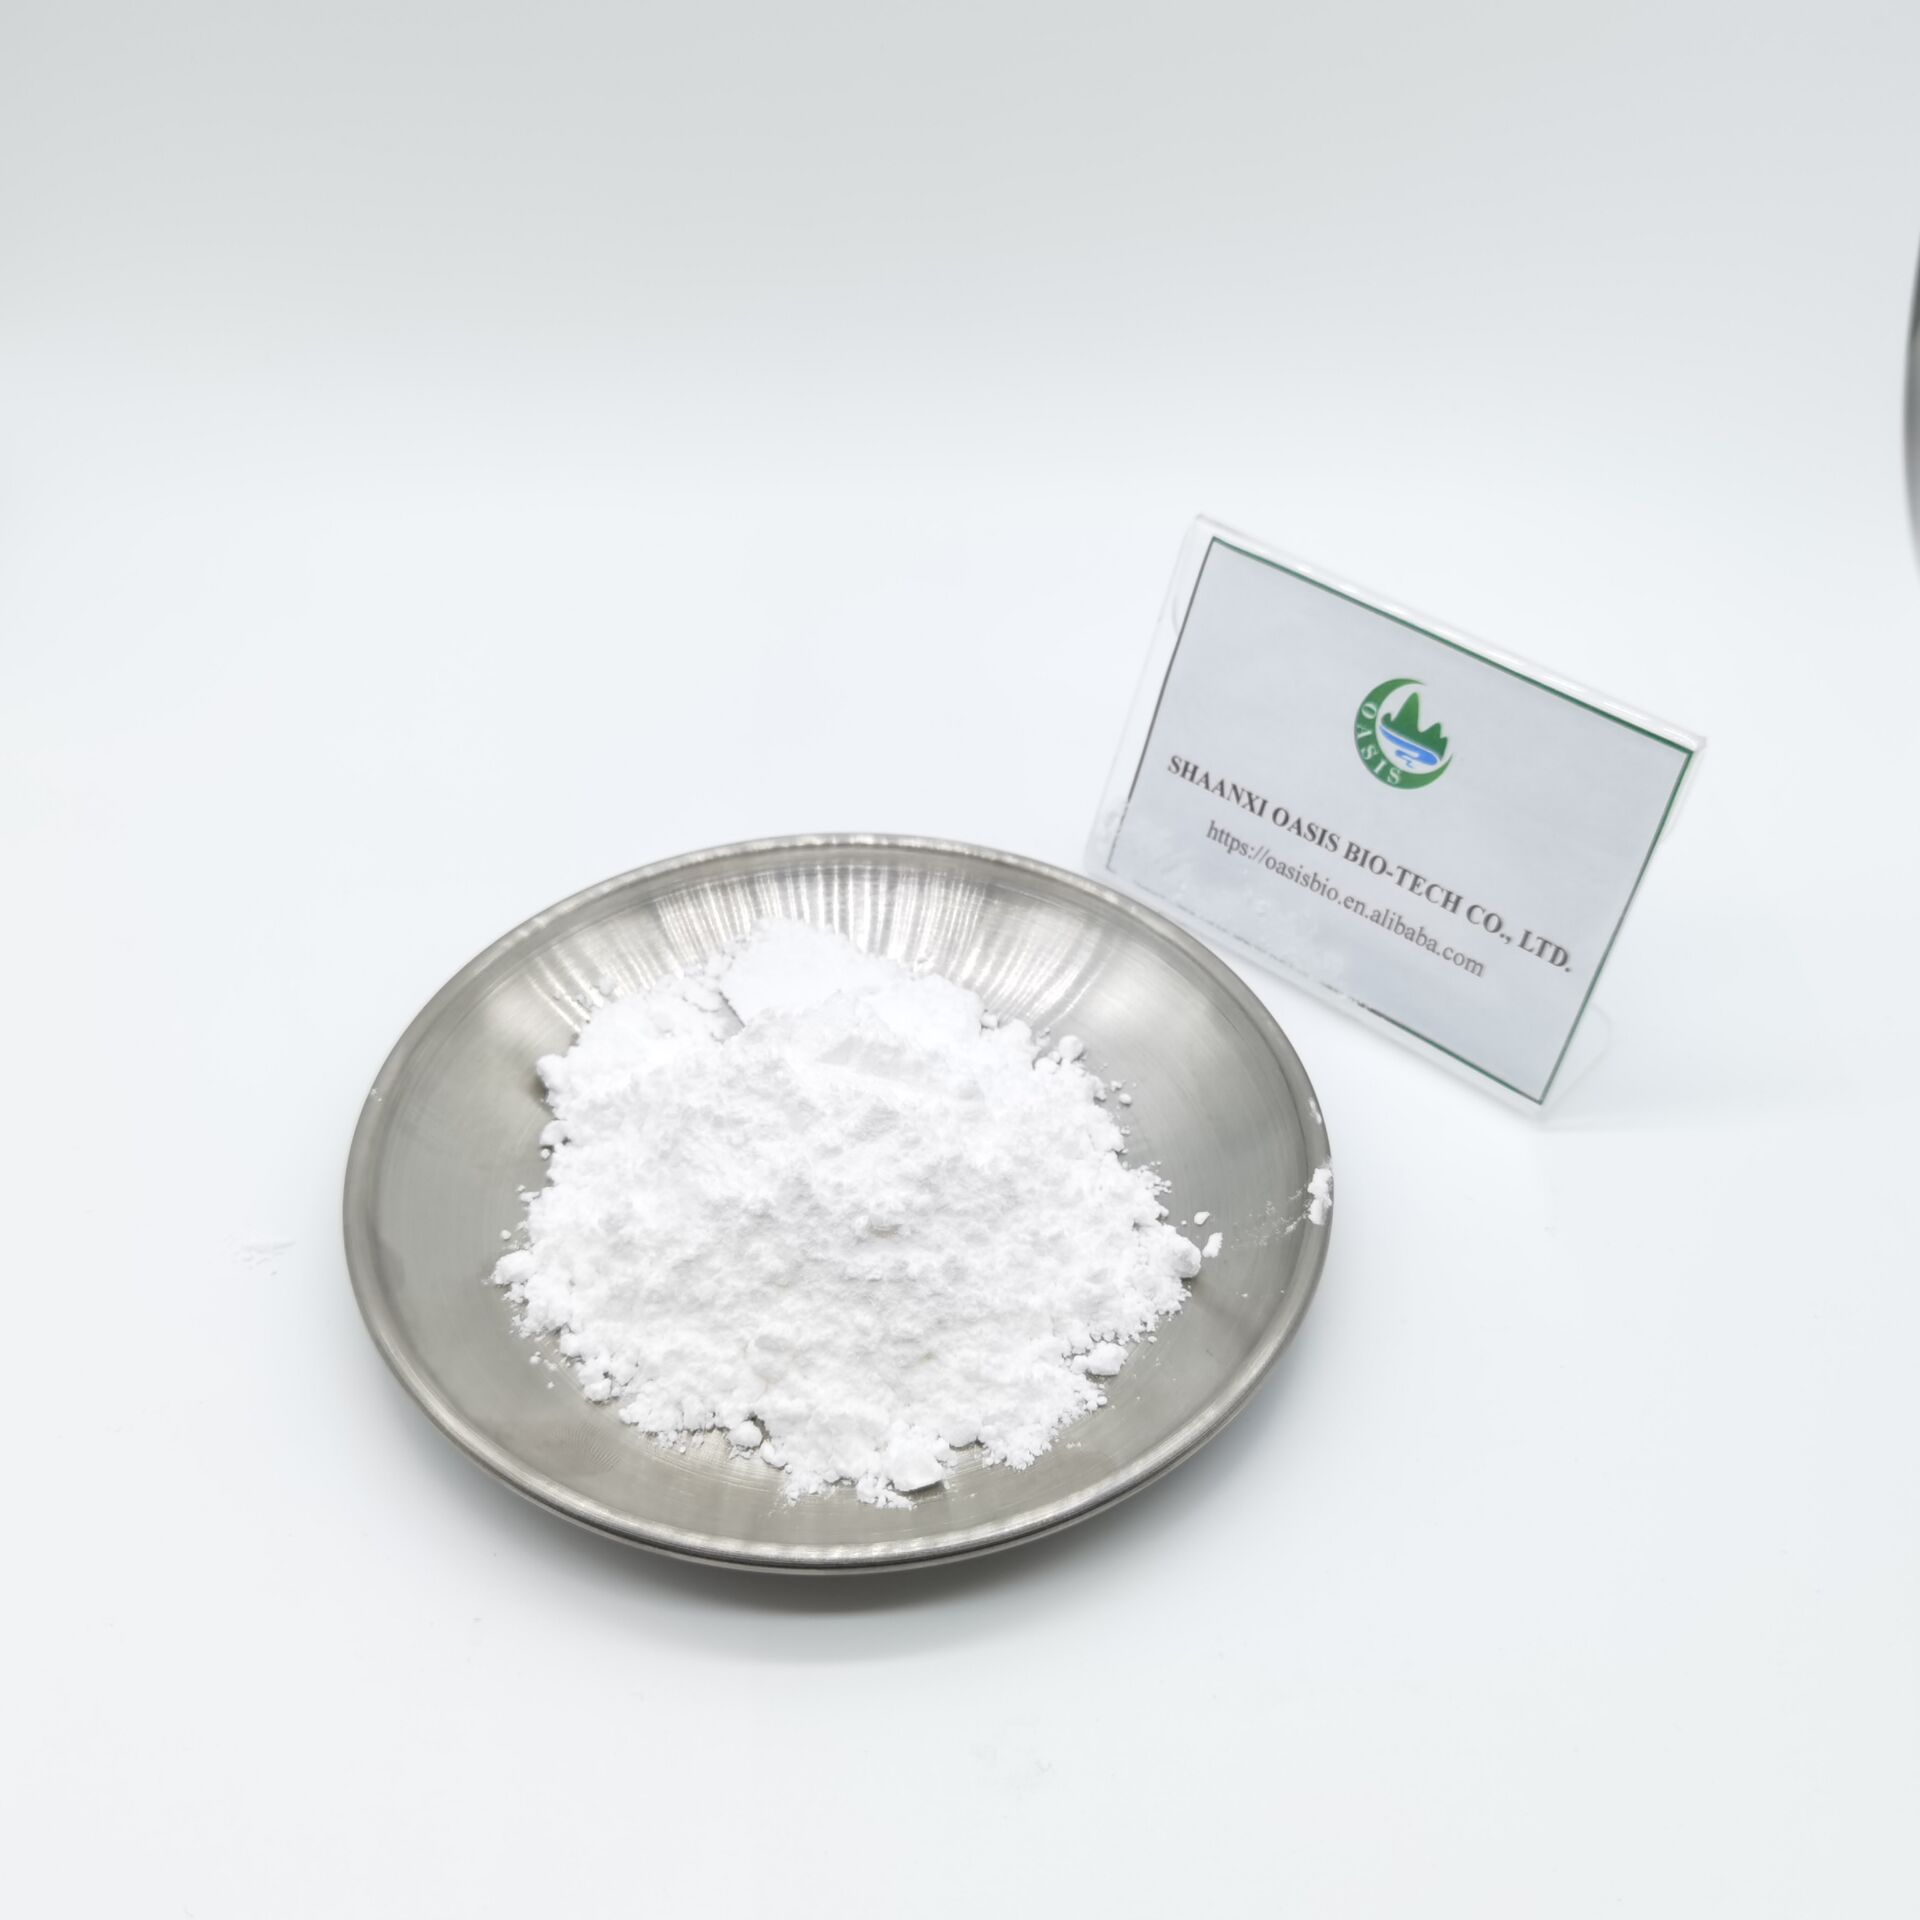 High Quality 99% Cetilistat Powder CAS.282526-98-1 for Weight Loss